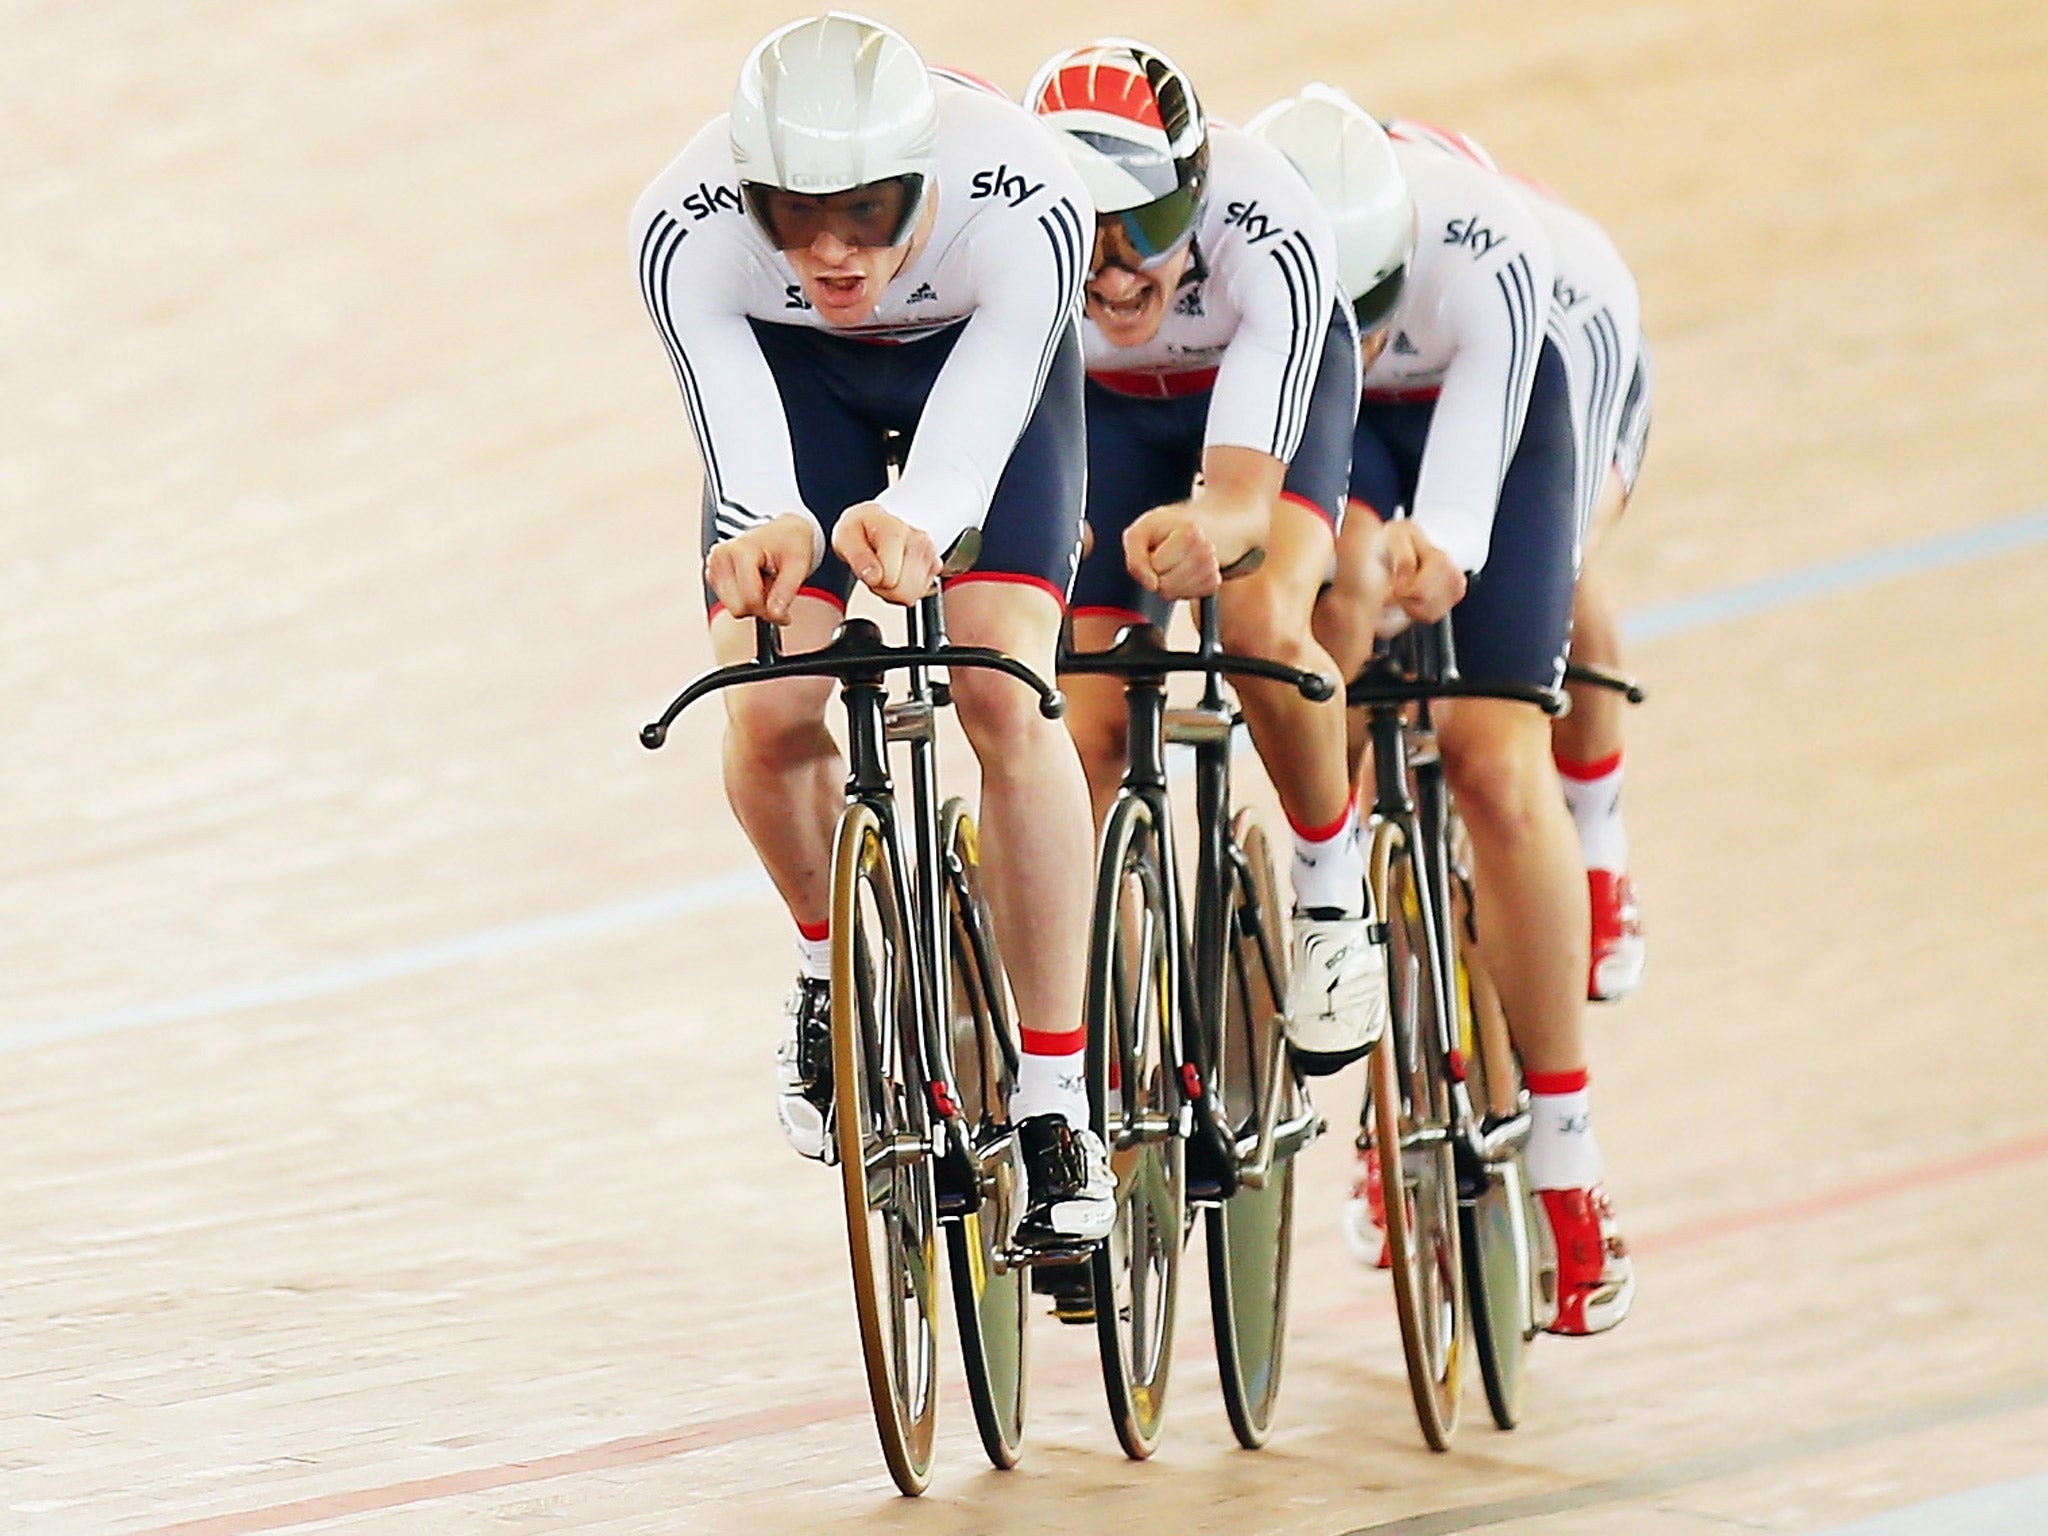 Ed Clancy leads the Great Britain team in men’s team pursuit in their doomed bid to qualify on day one of the 2014 UCI Track Cycling World Championships